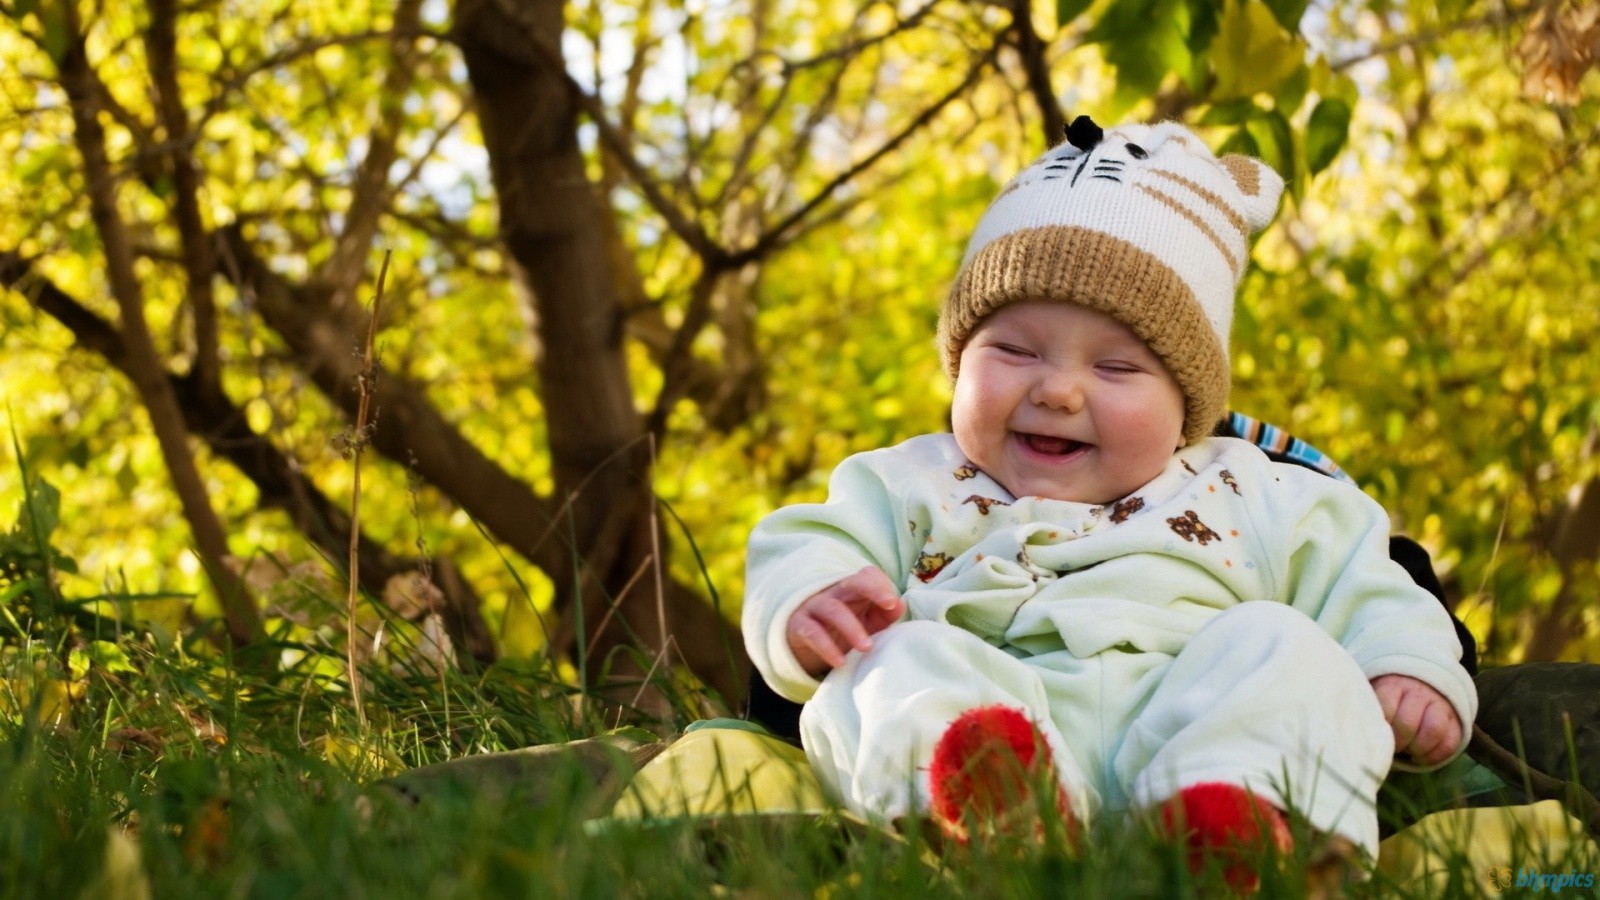 Small Cute Babies Wallpapers Photo - Boy Cute Baby Photos With A Smile Hd - HD Wallpaper 